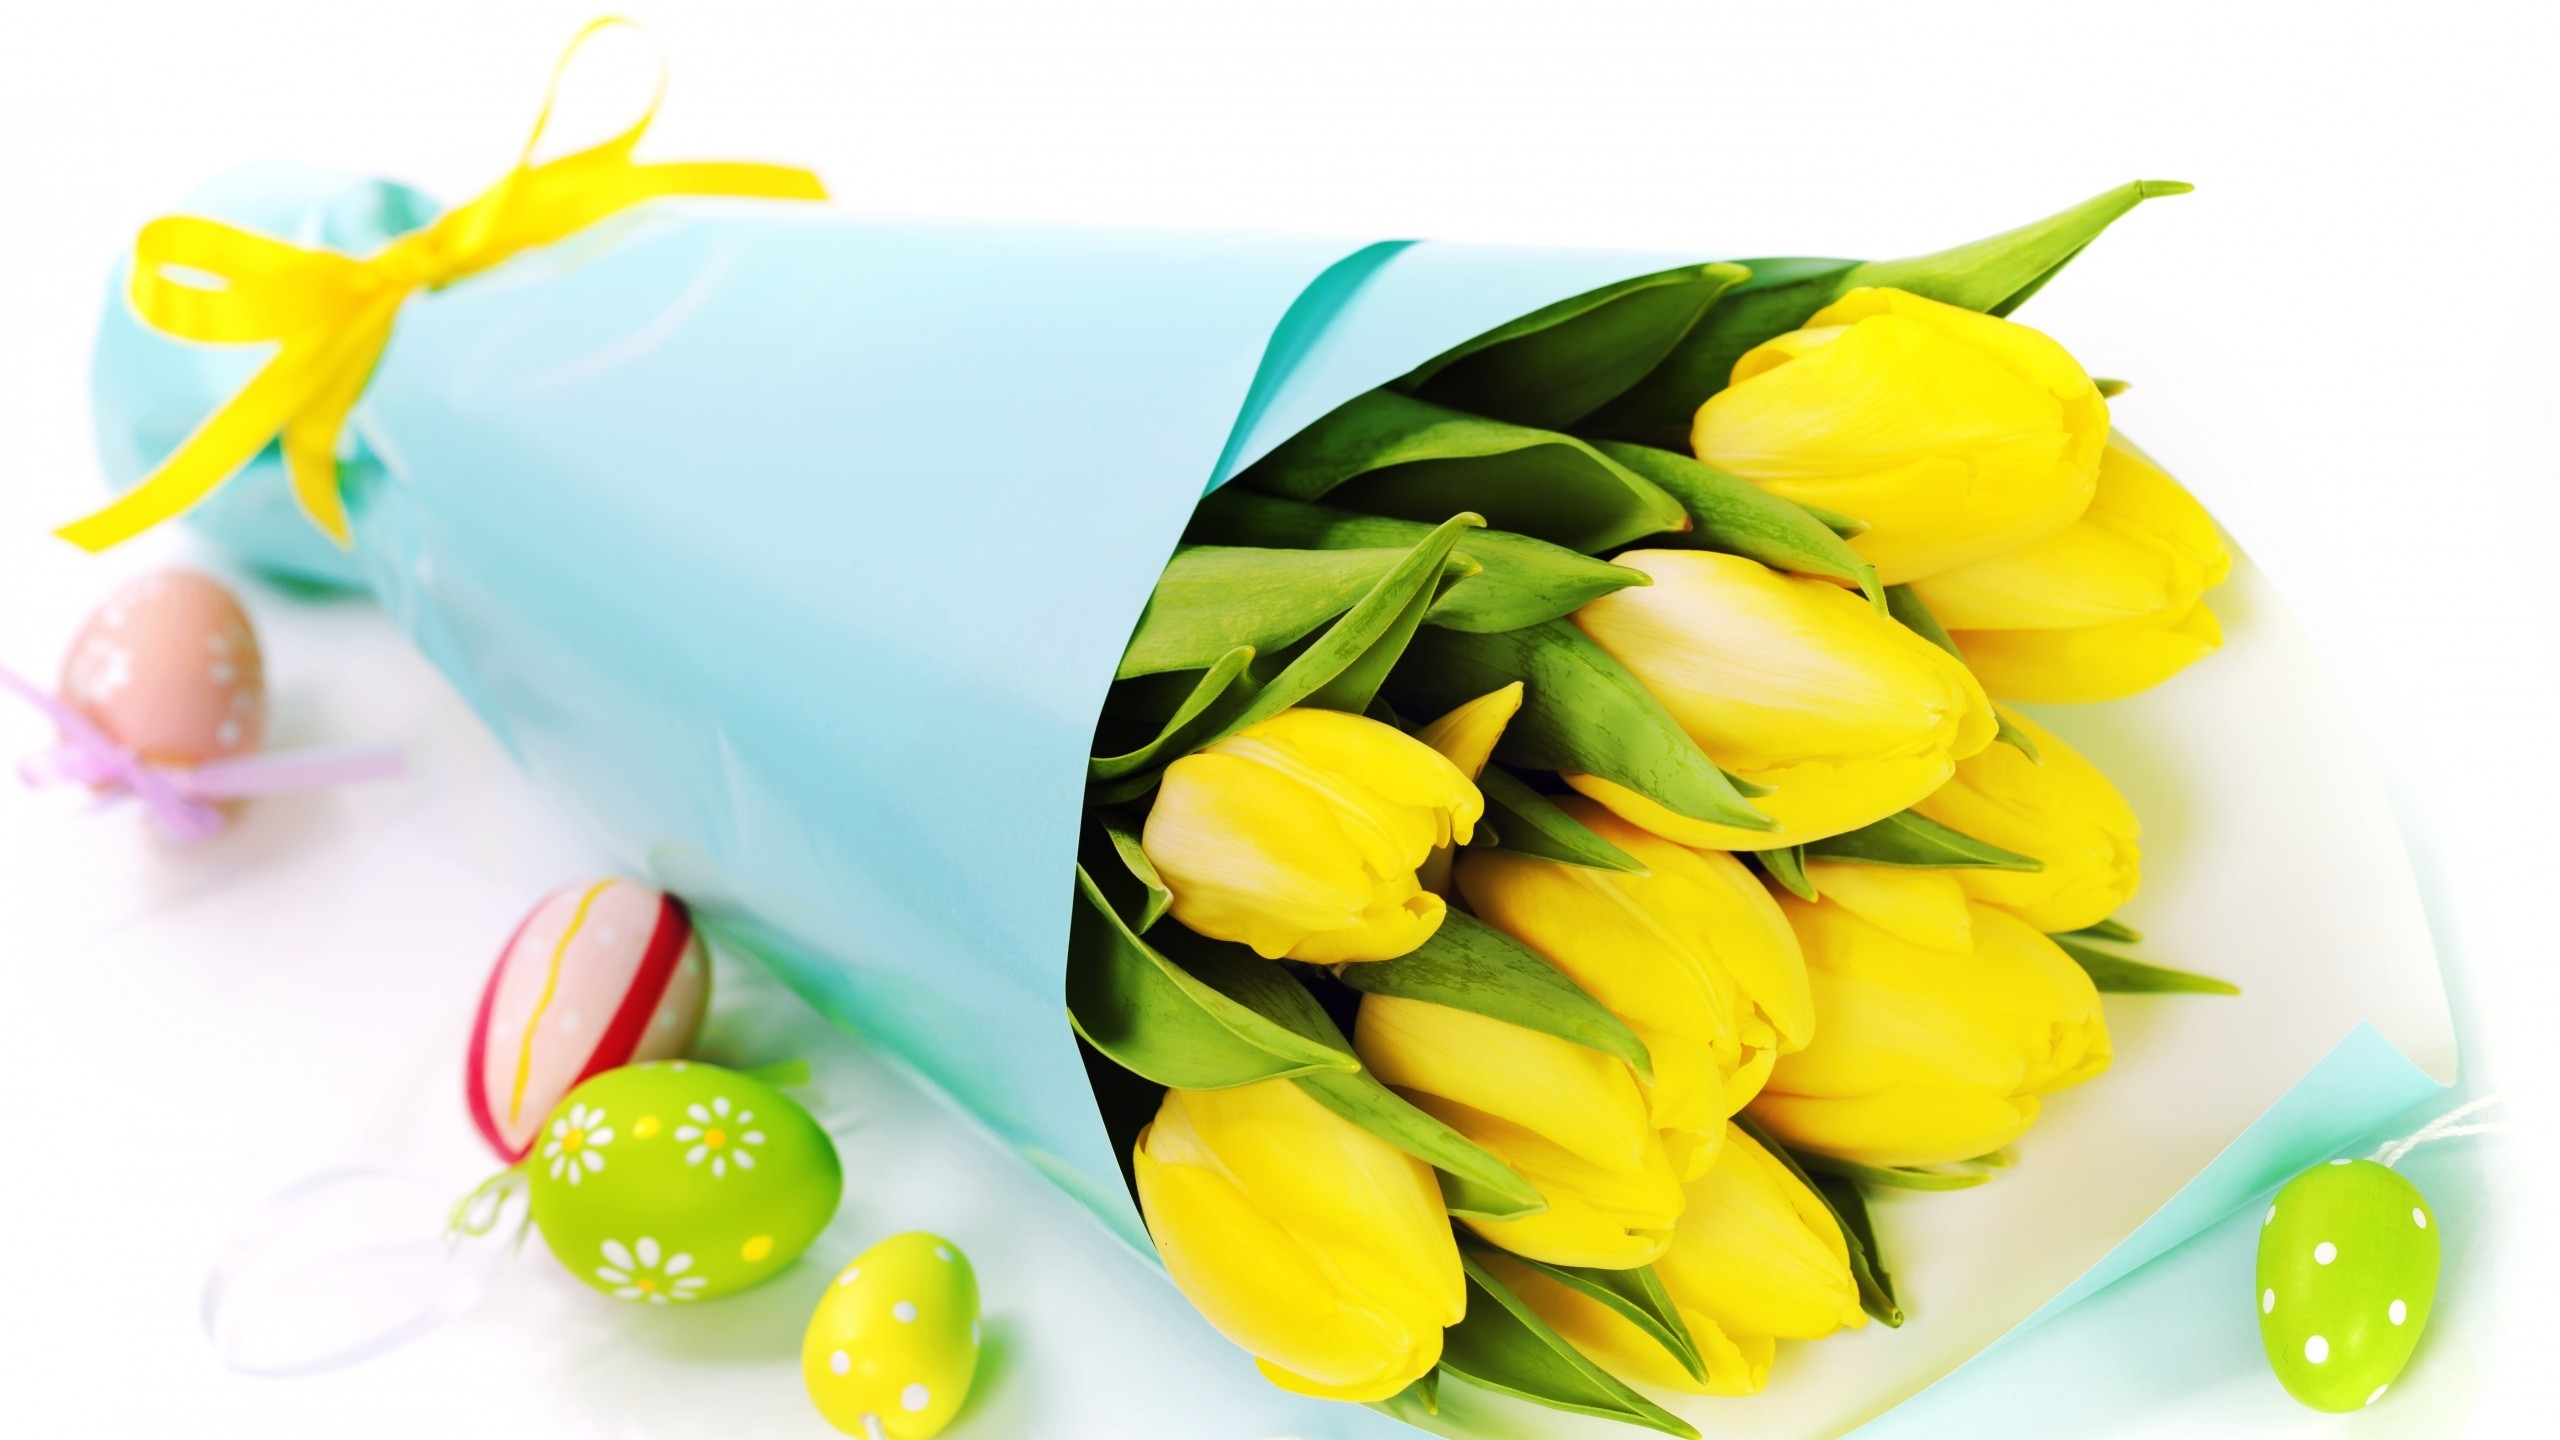 Easter Tulips and Egs for 2560x1440 HDTV resolution